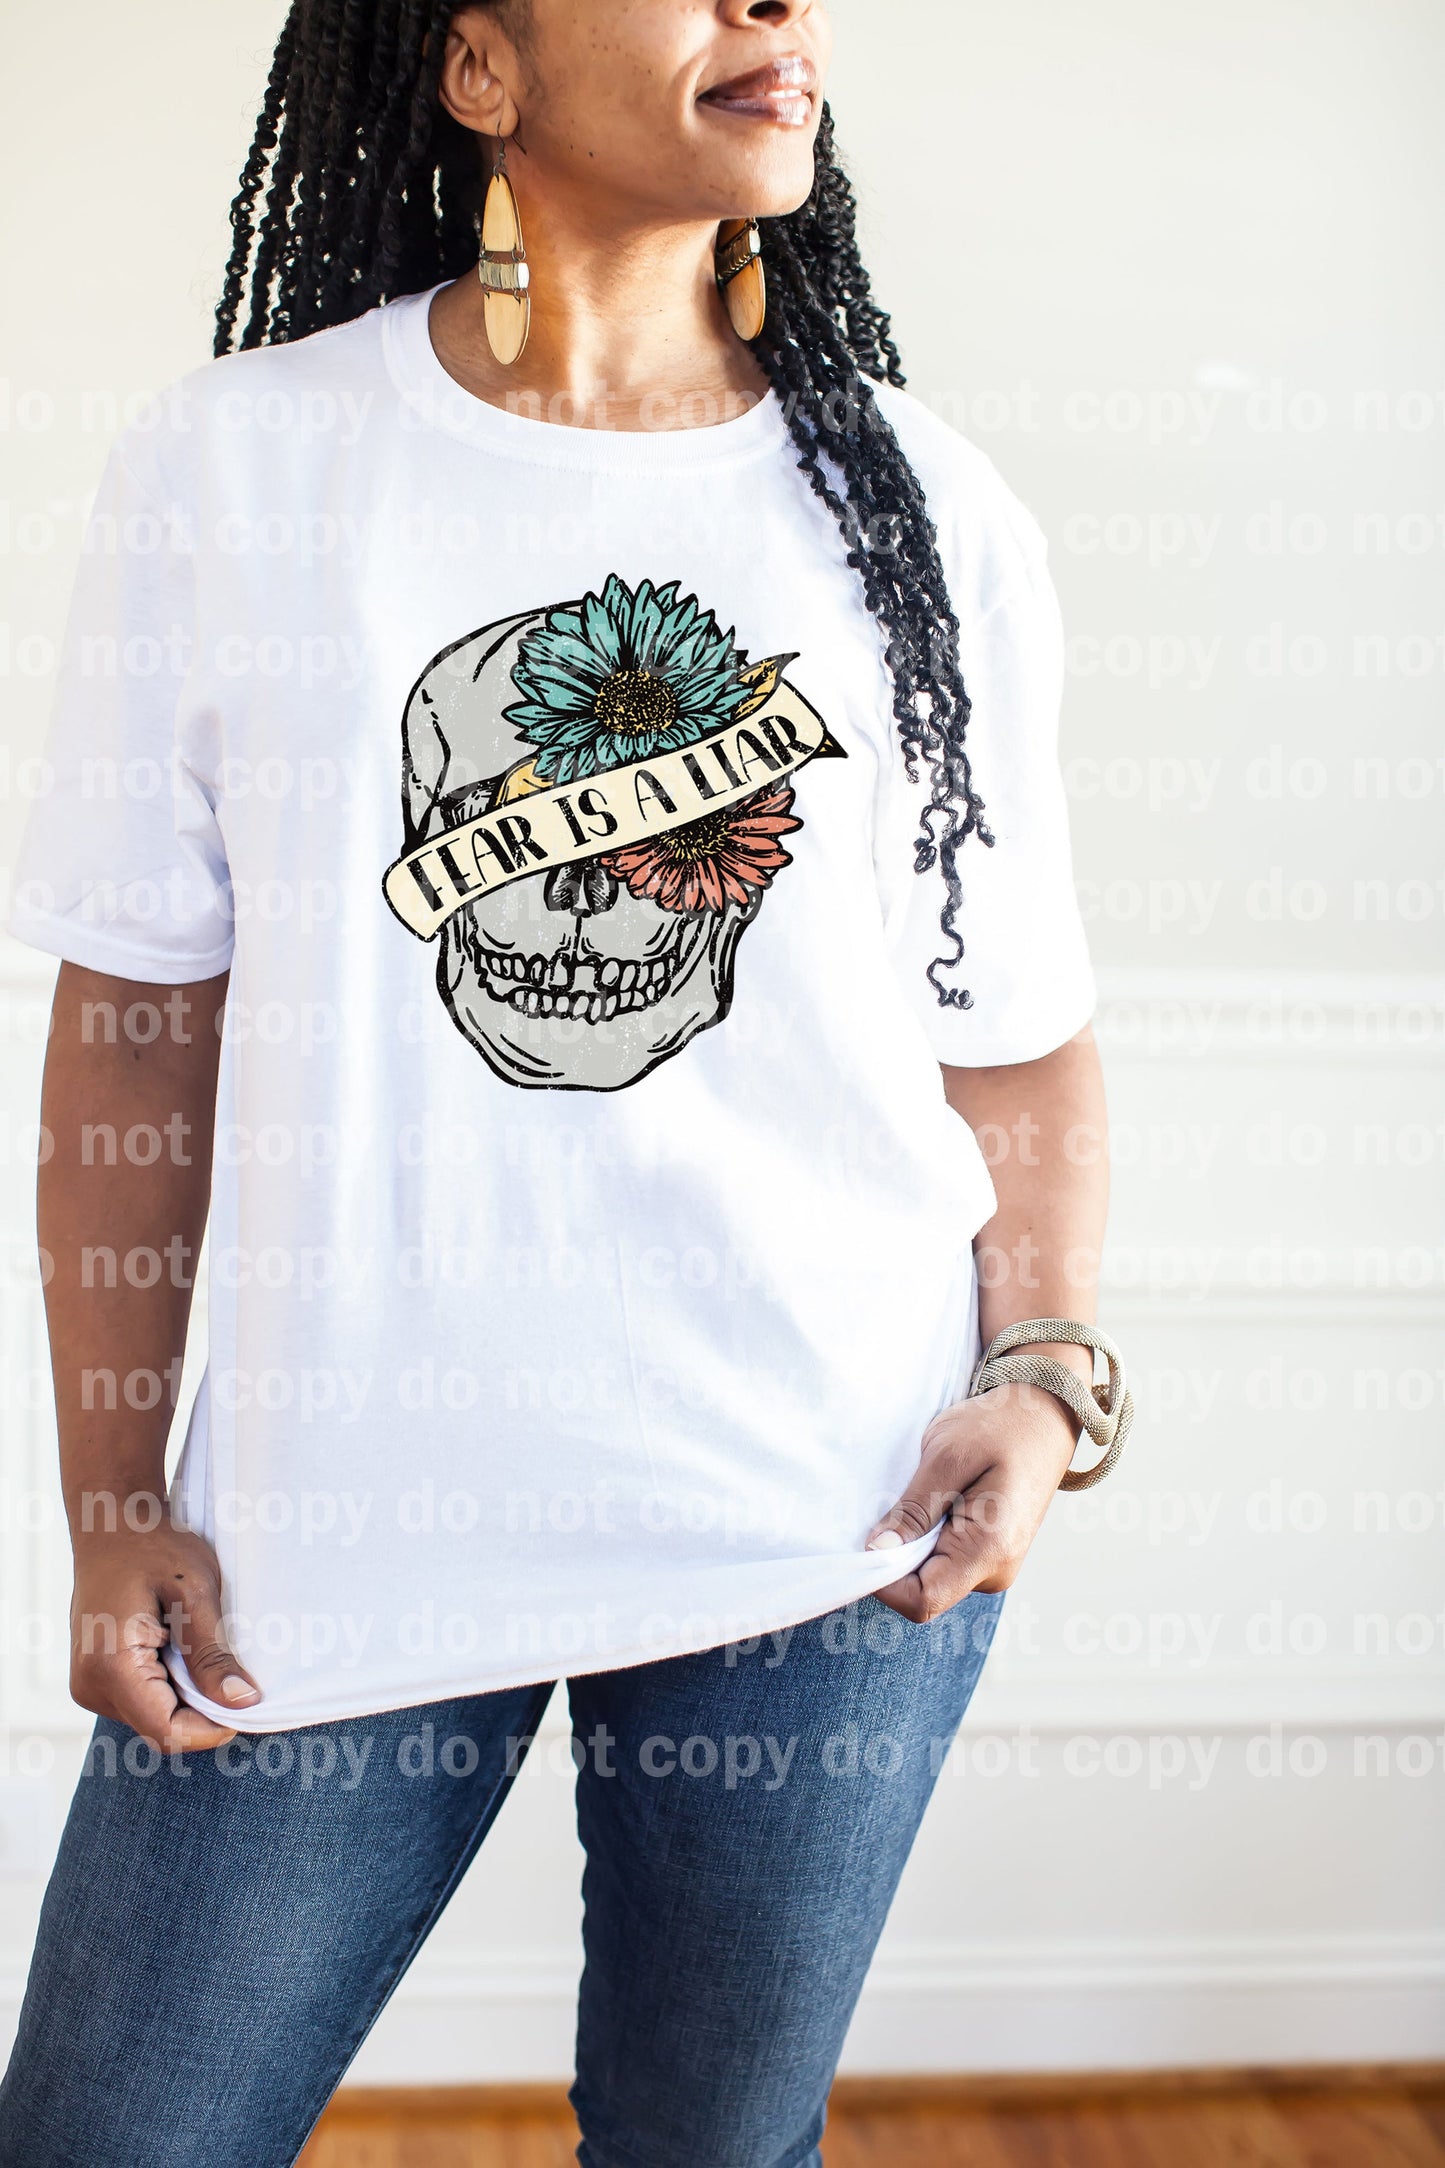 Fear Is A Liar Distressed Full Color/One Color Dream Print or Sublimation Print